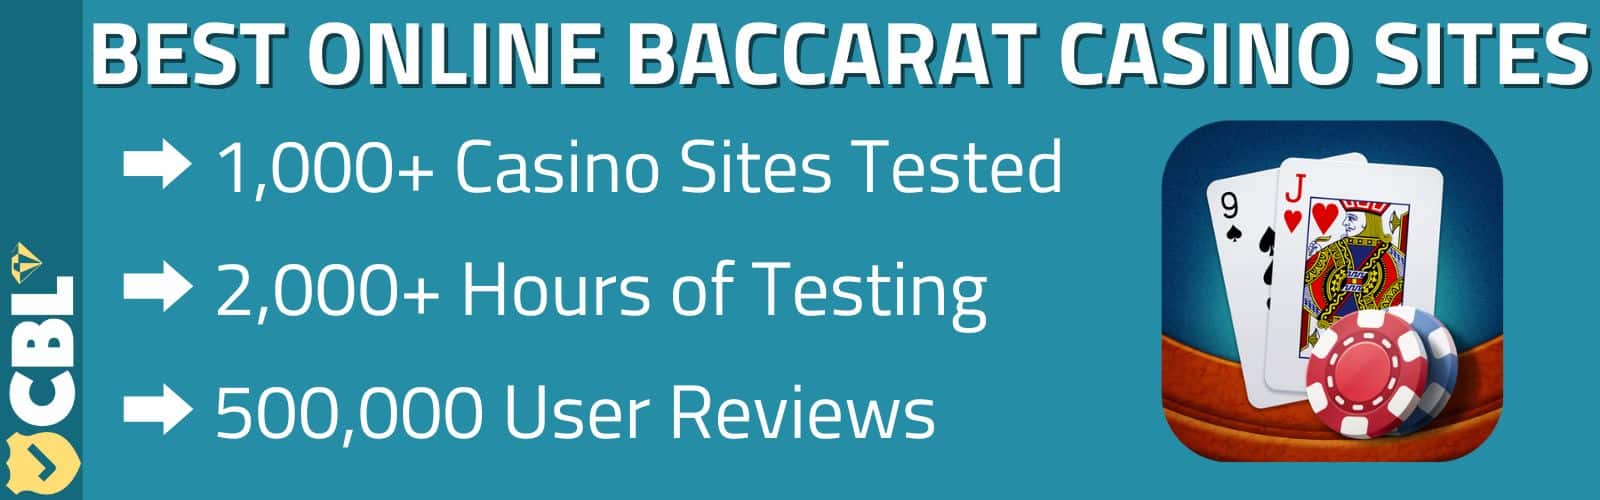 Best baccaract online casino sites